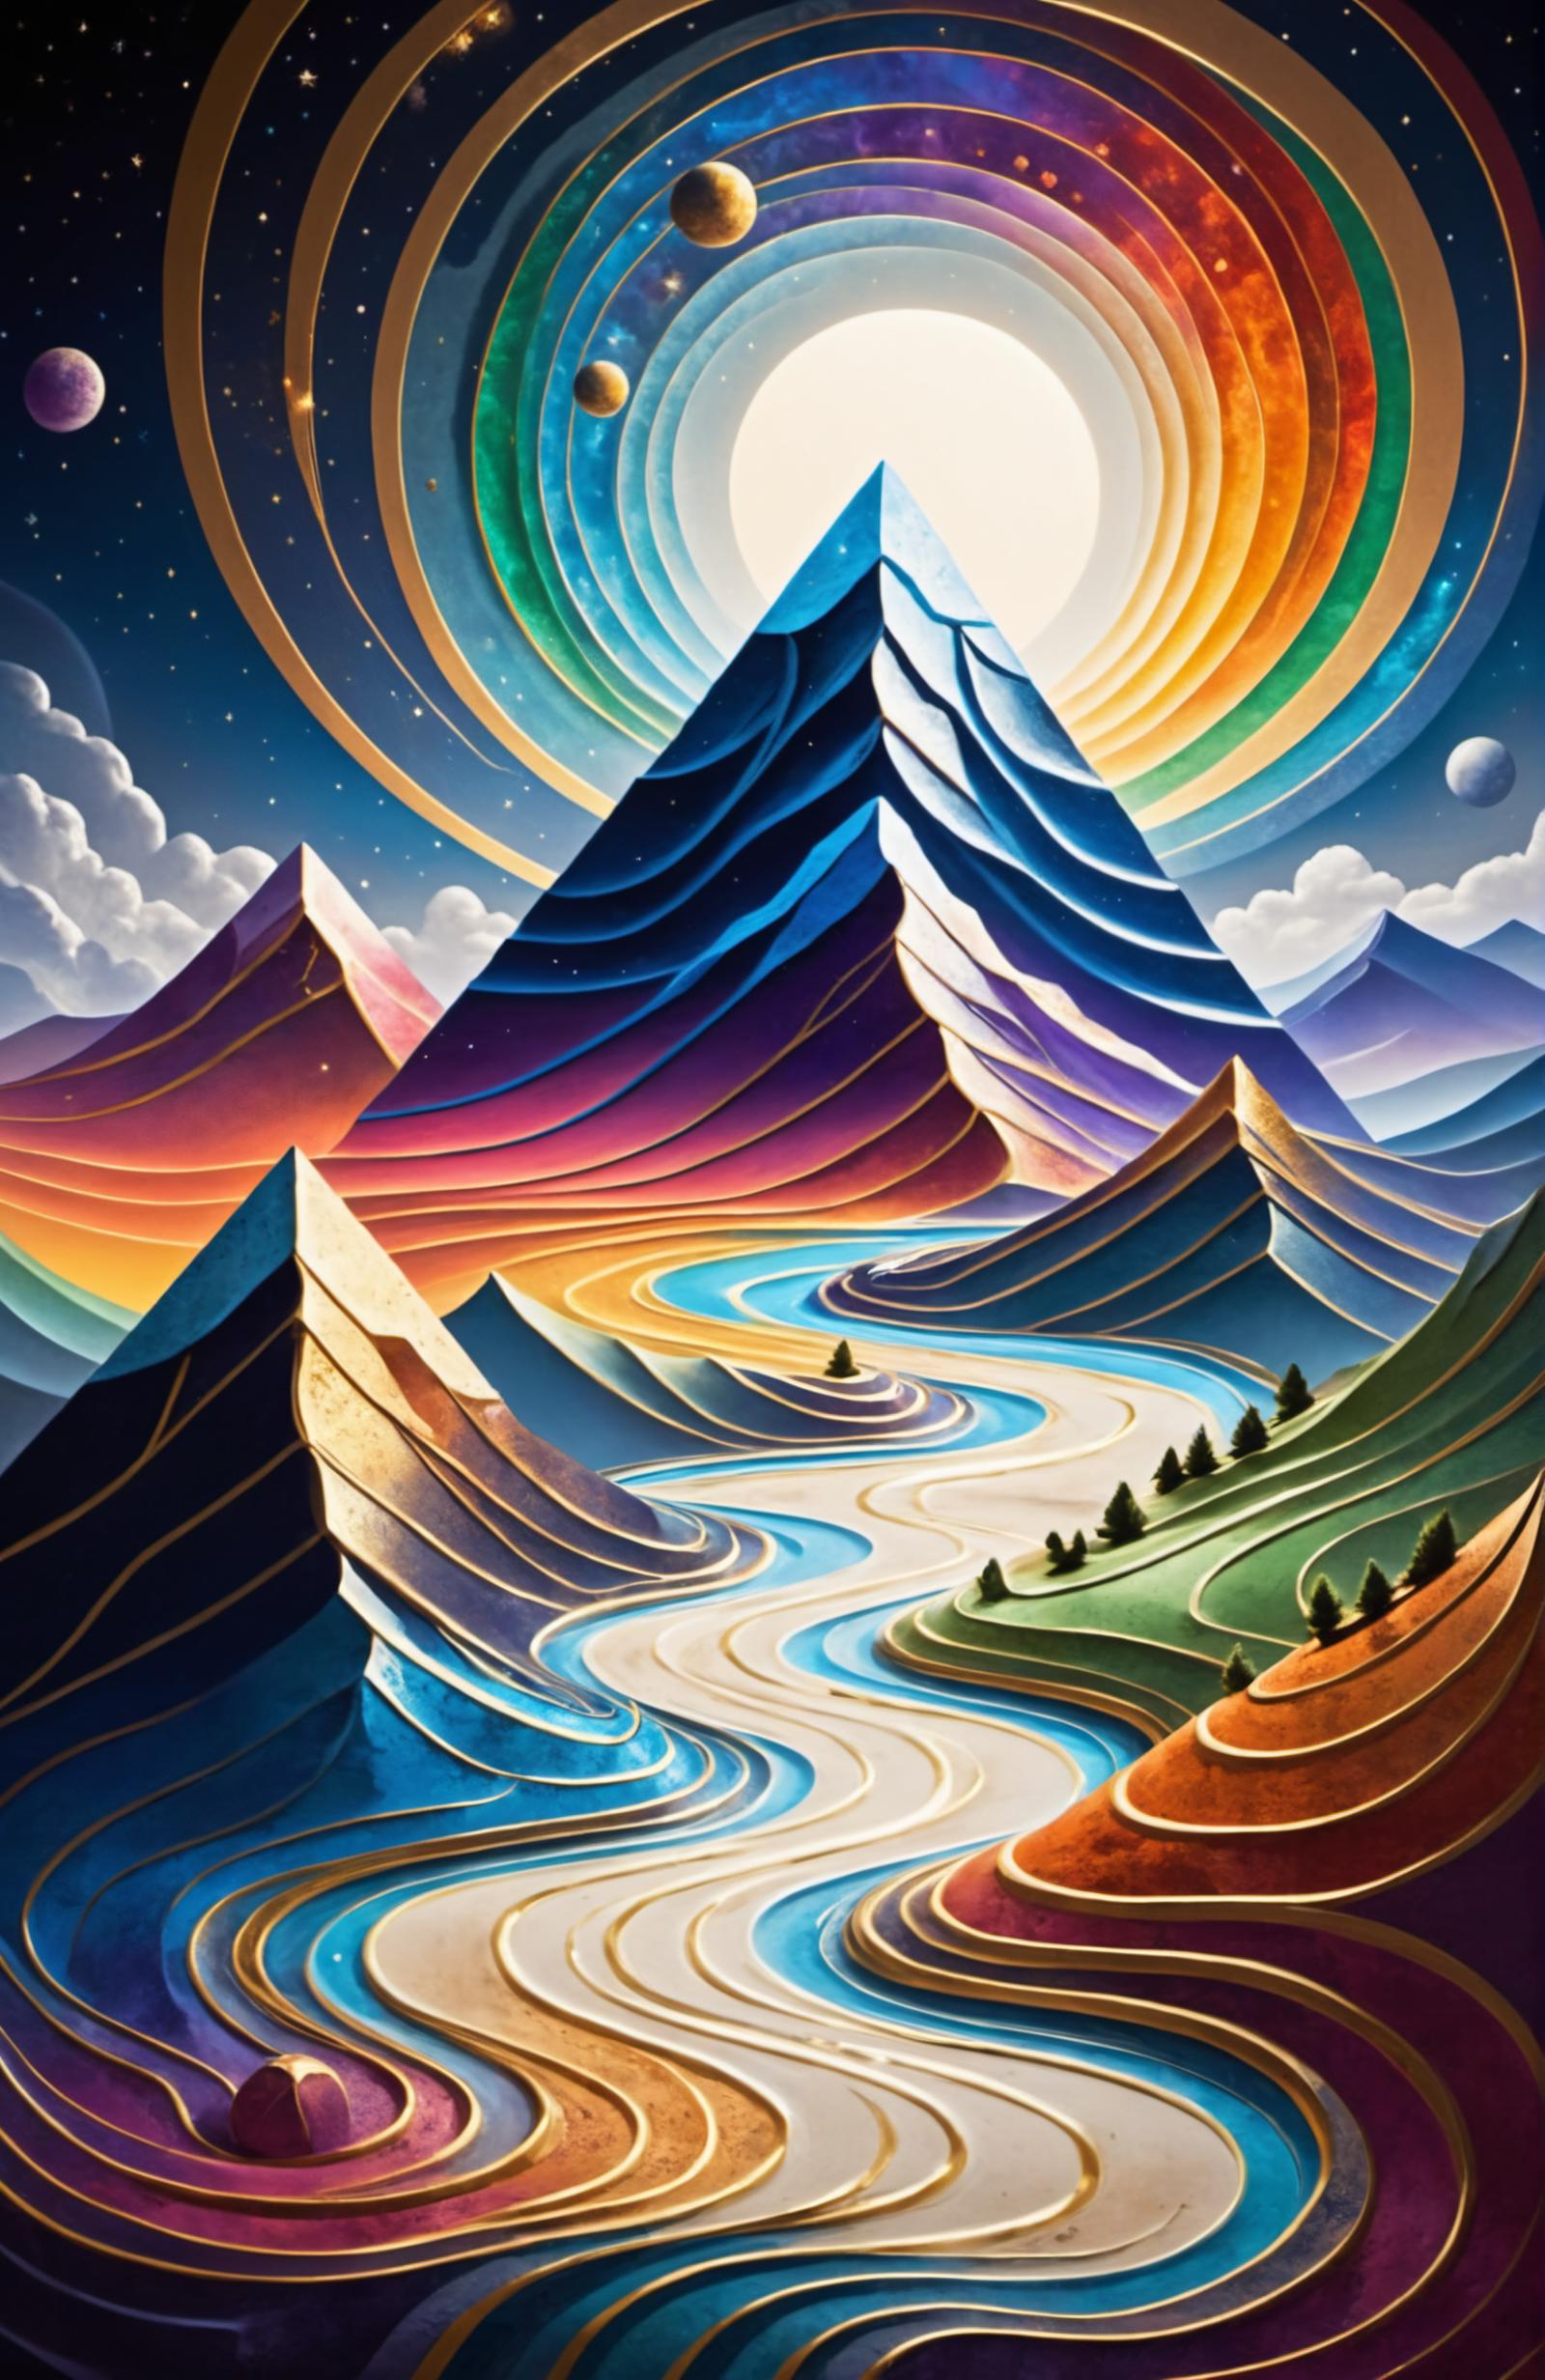 A painting of a colorful mountain range with a river and a sun.